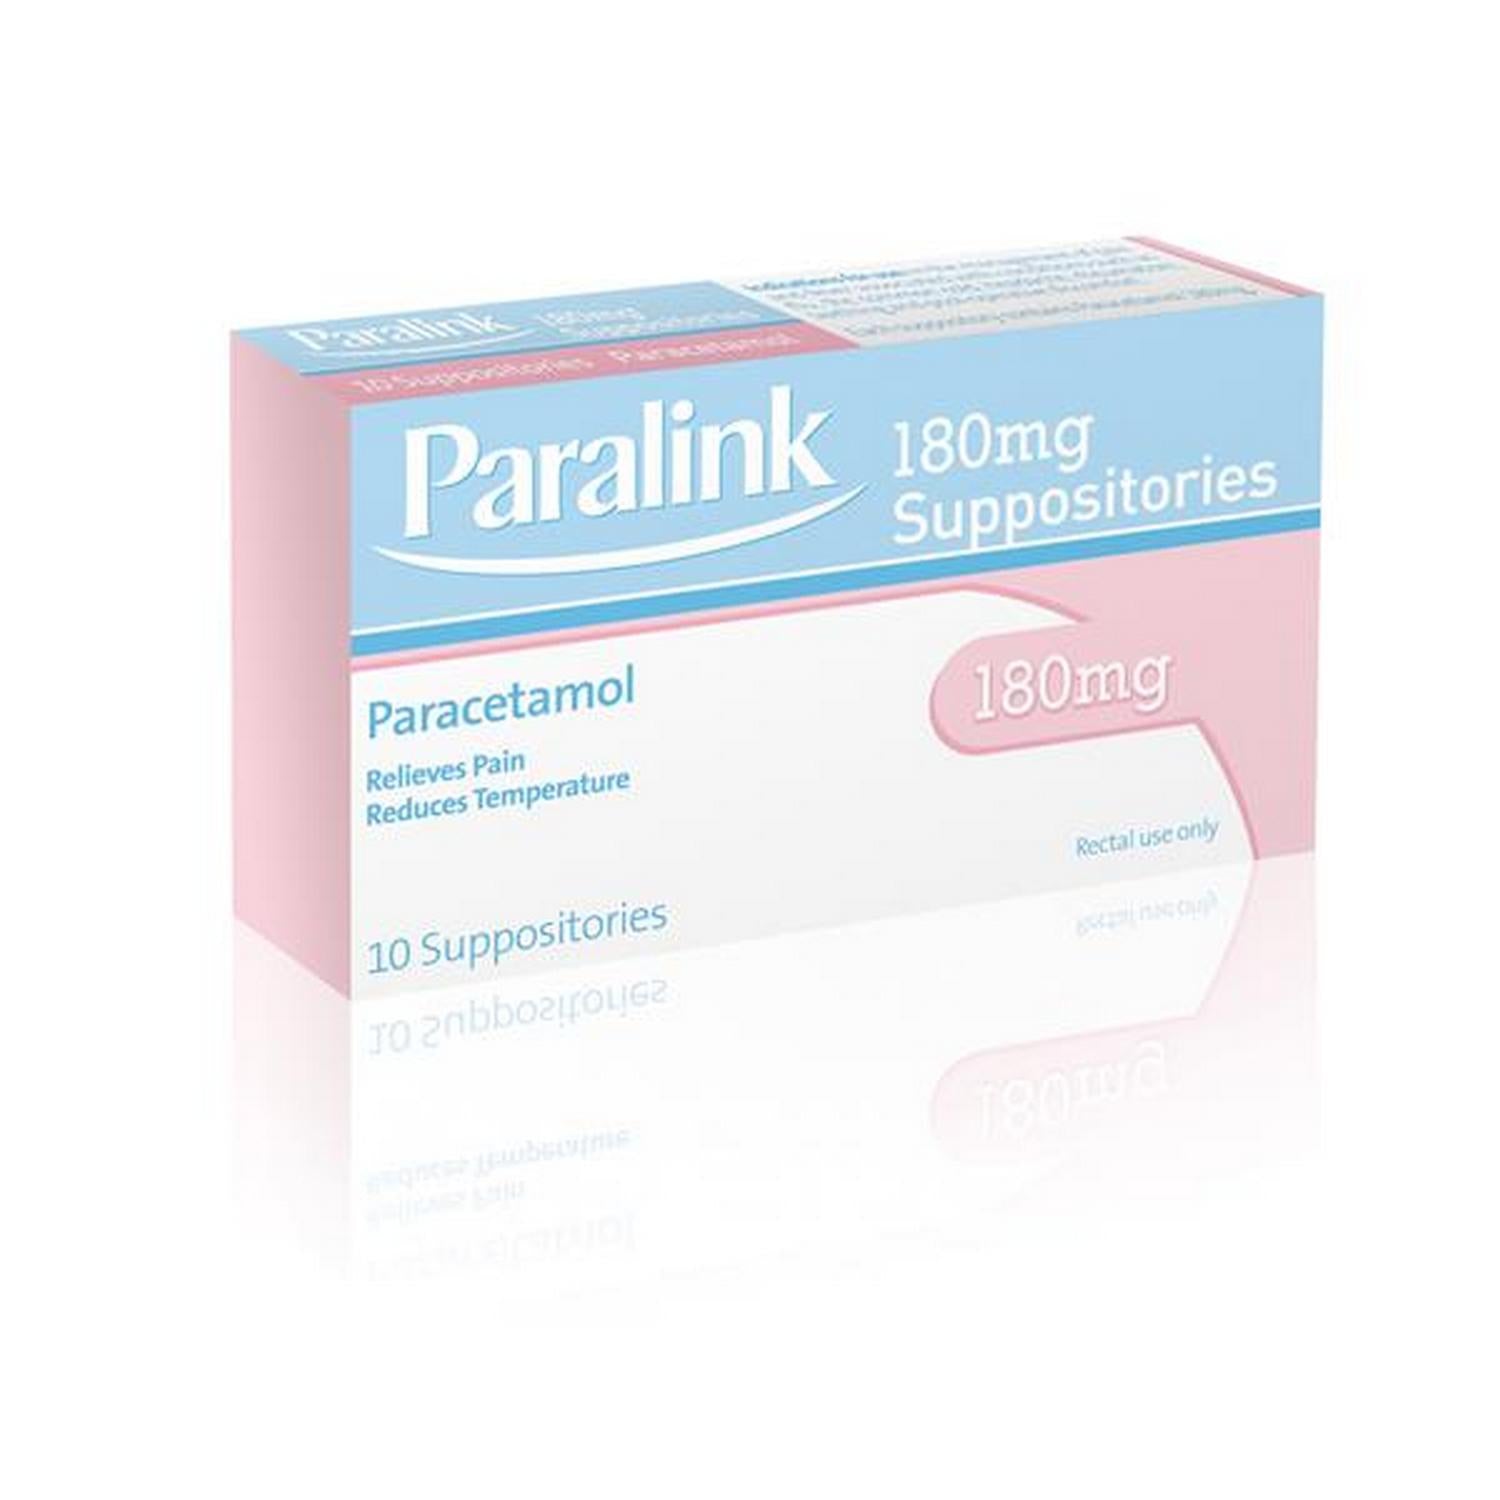 Paralink 180mg Suppositories